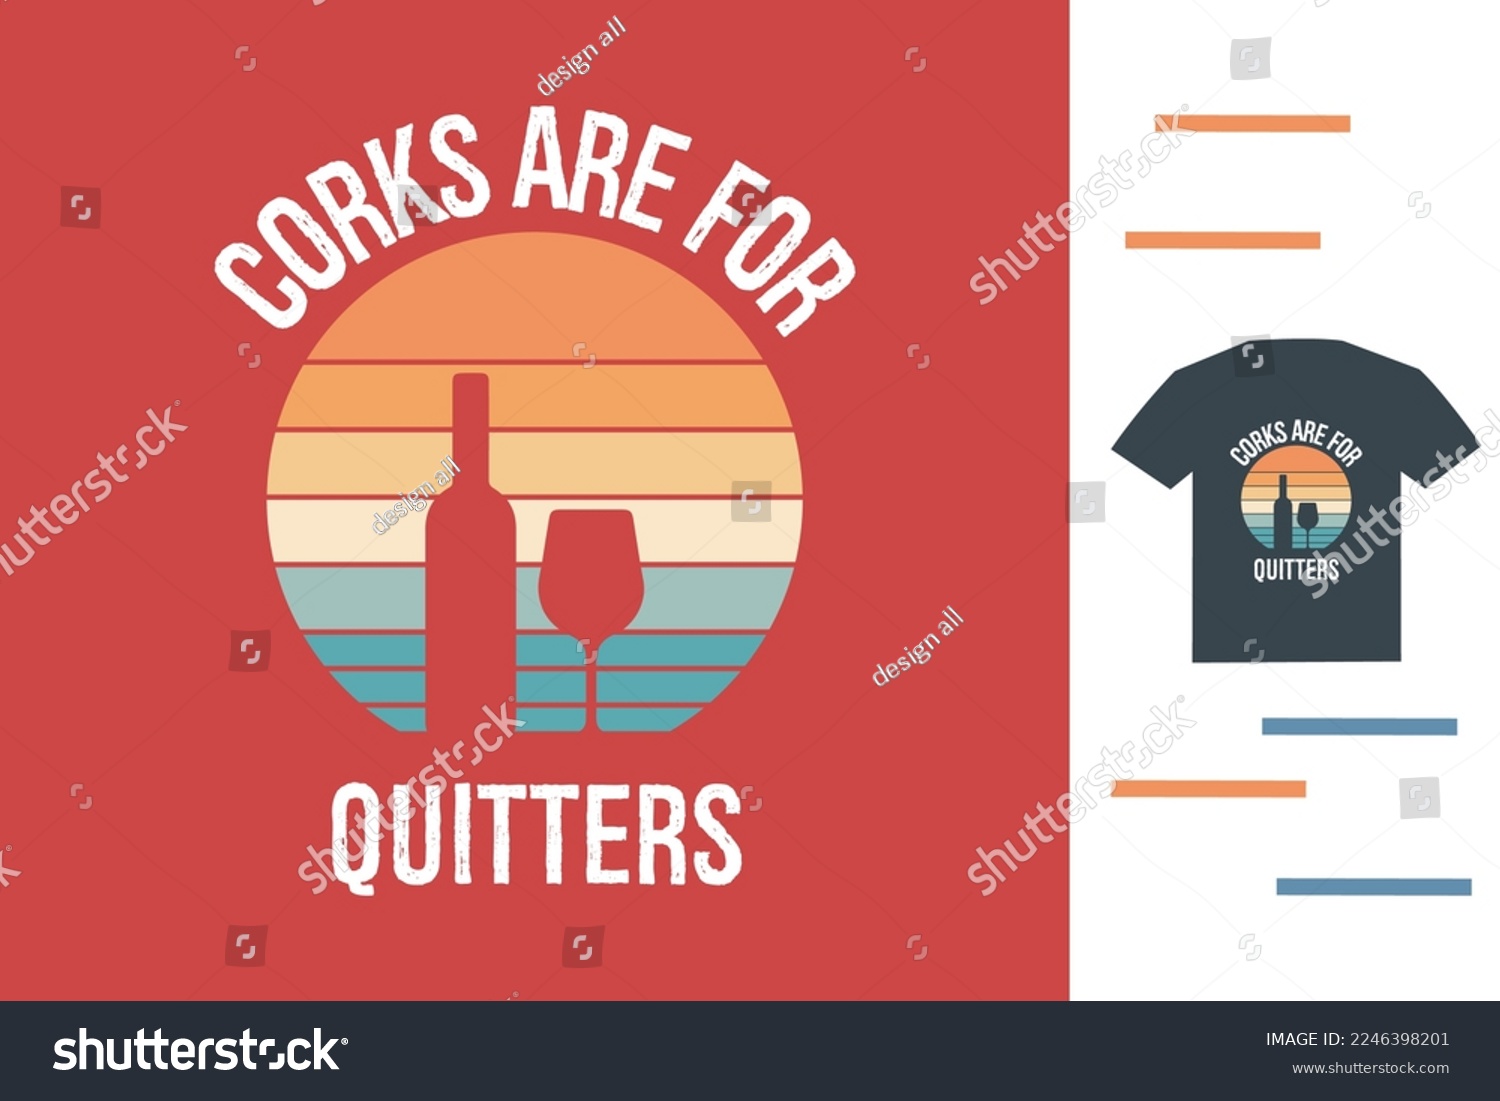 SVG of Corks are for quitters t shirt design  svg